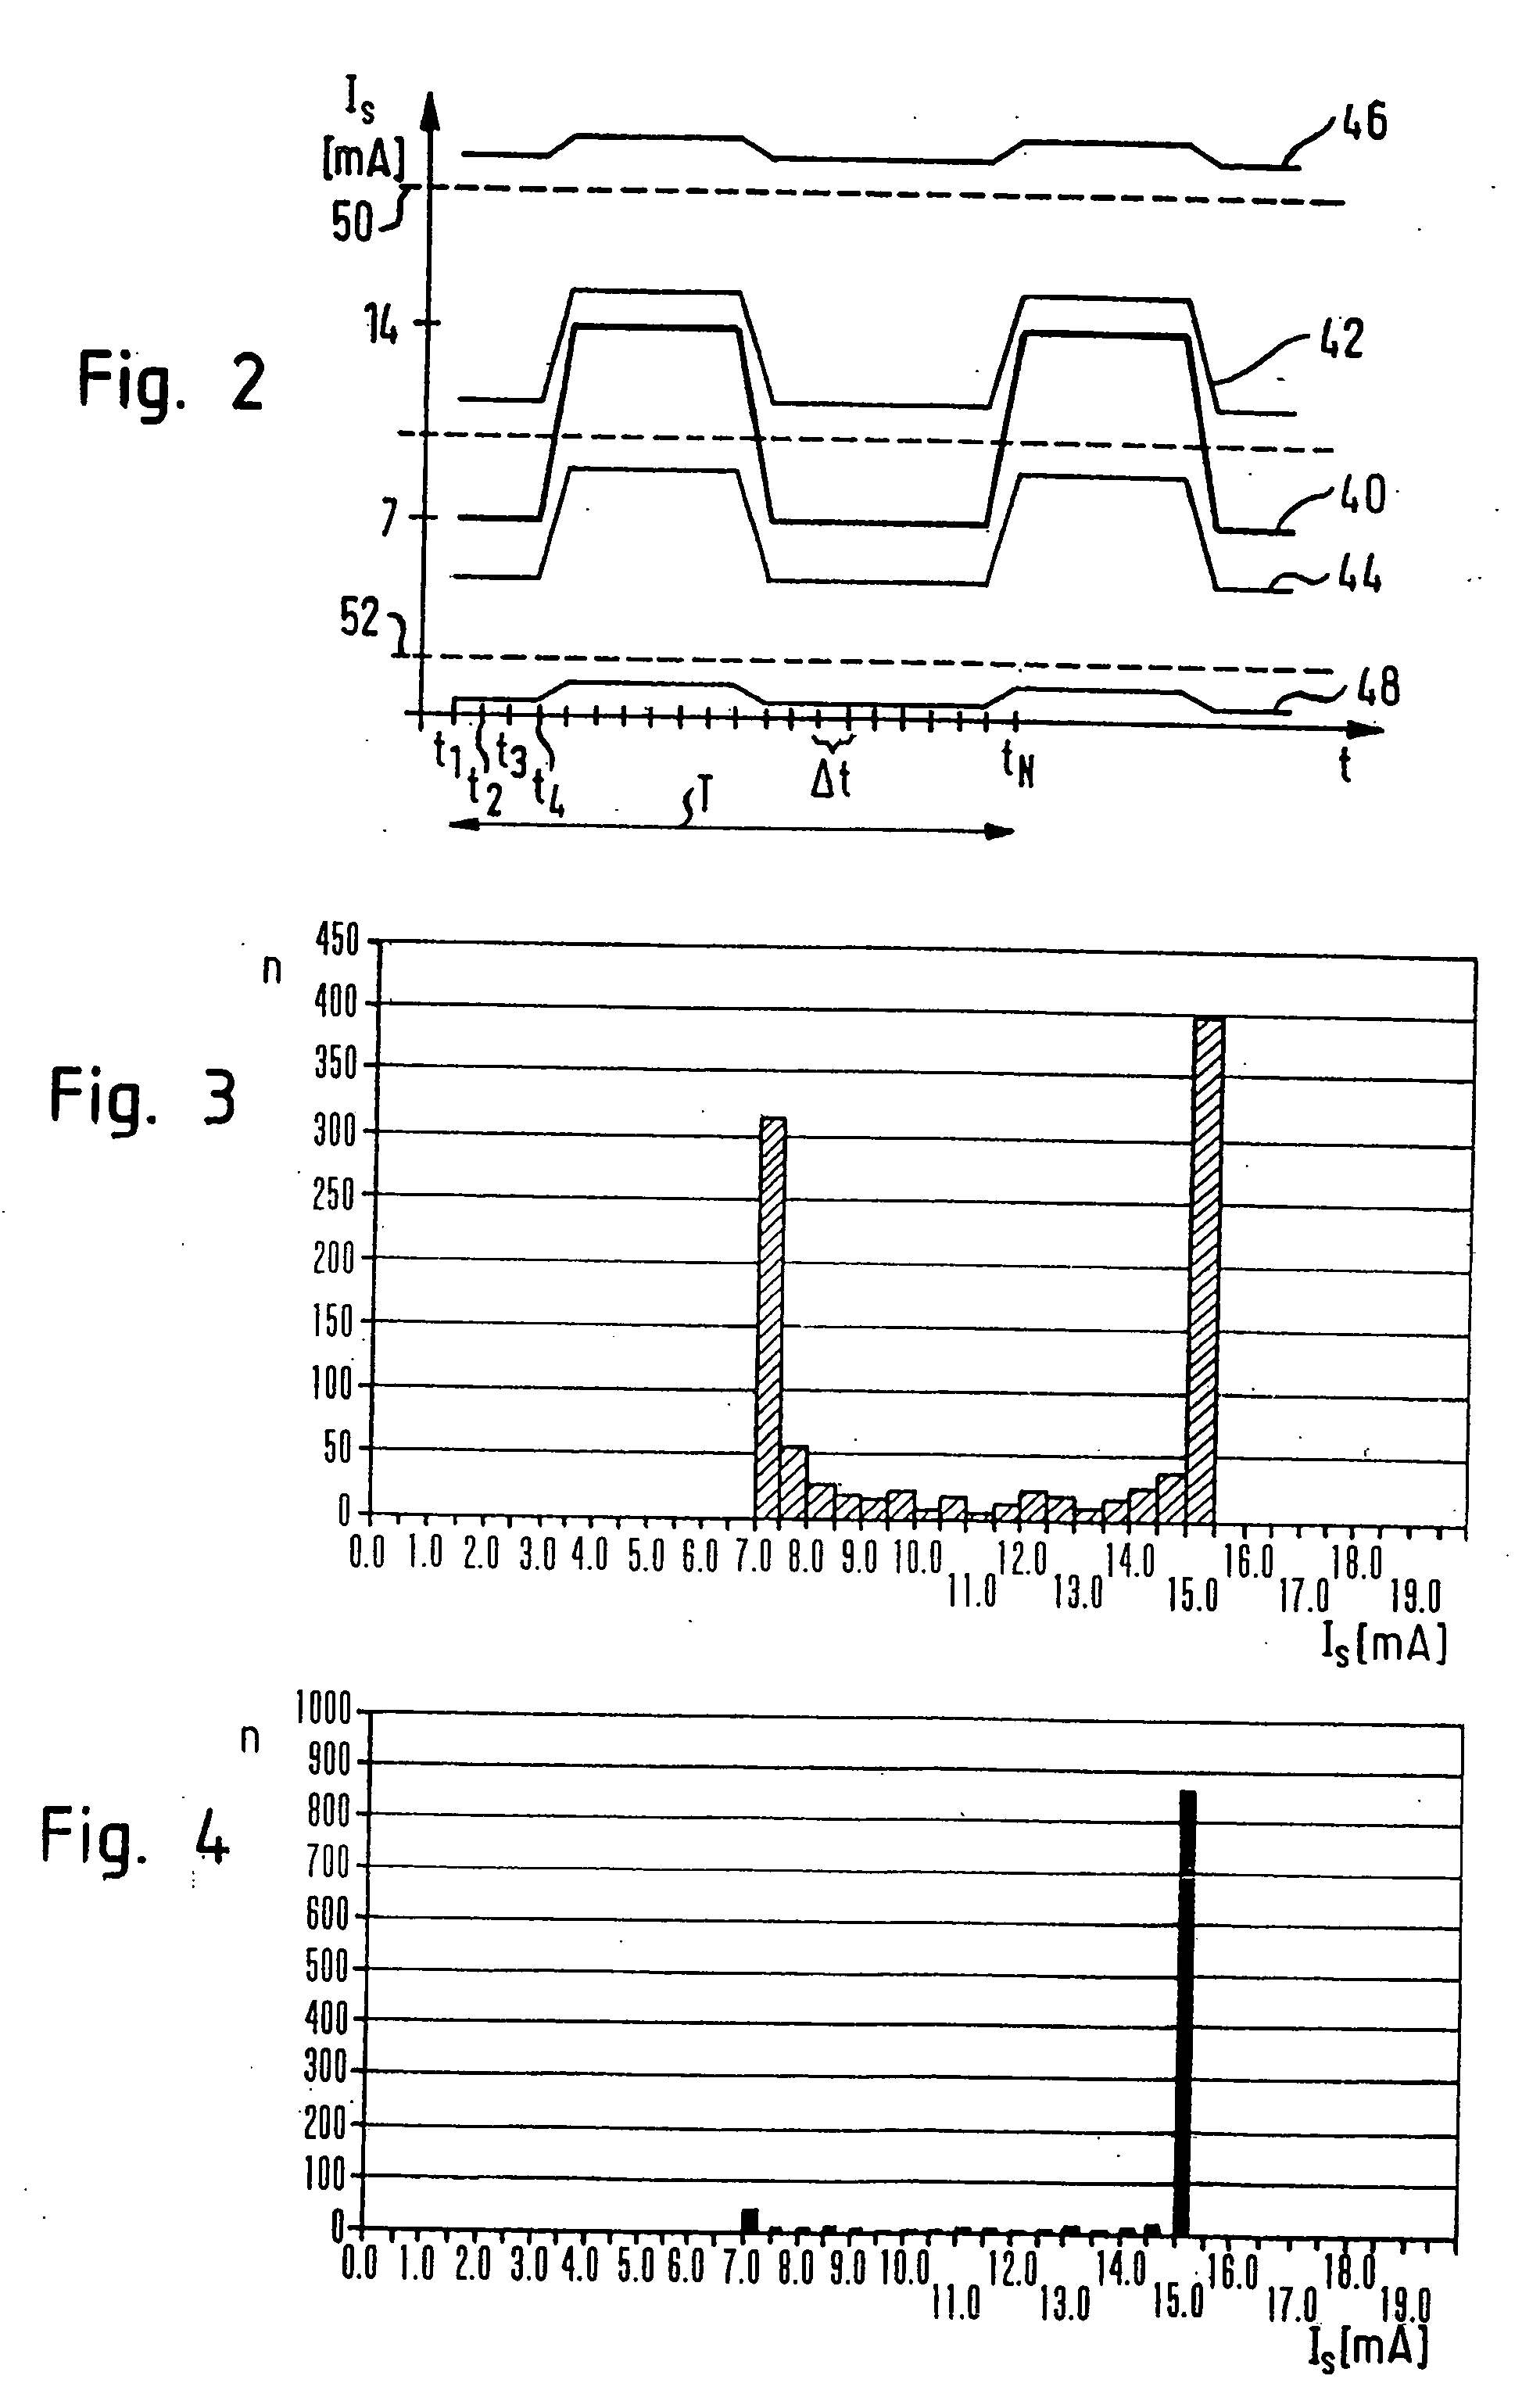 Method and device for detecting a rotational speed, especially the rotational speed of the wheel of a vehicle